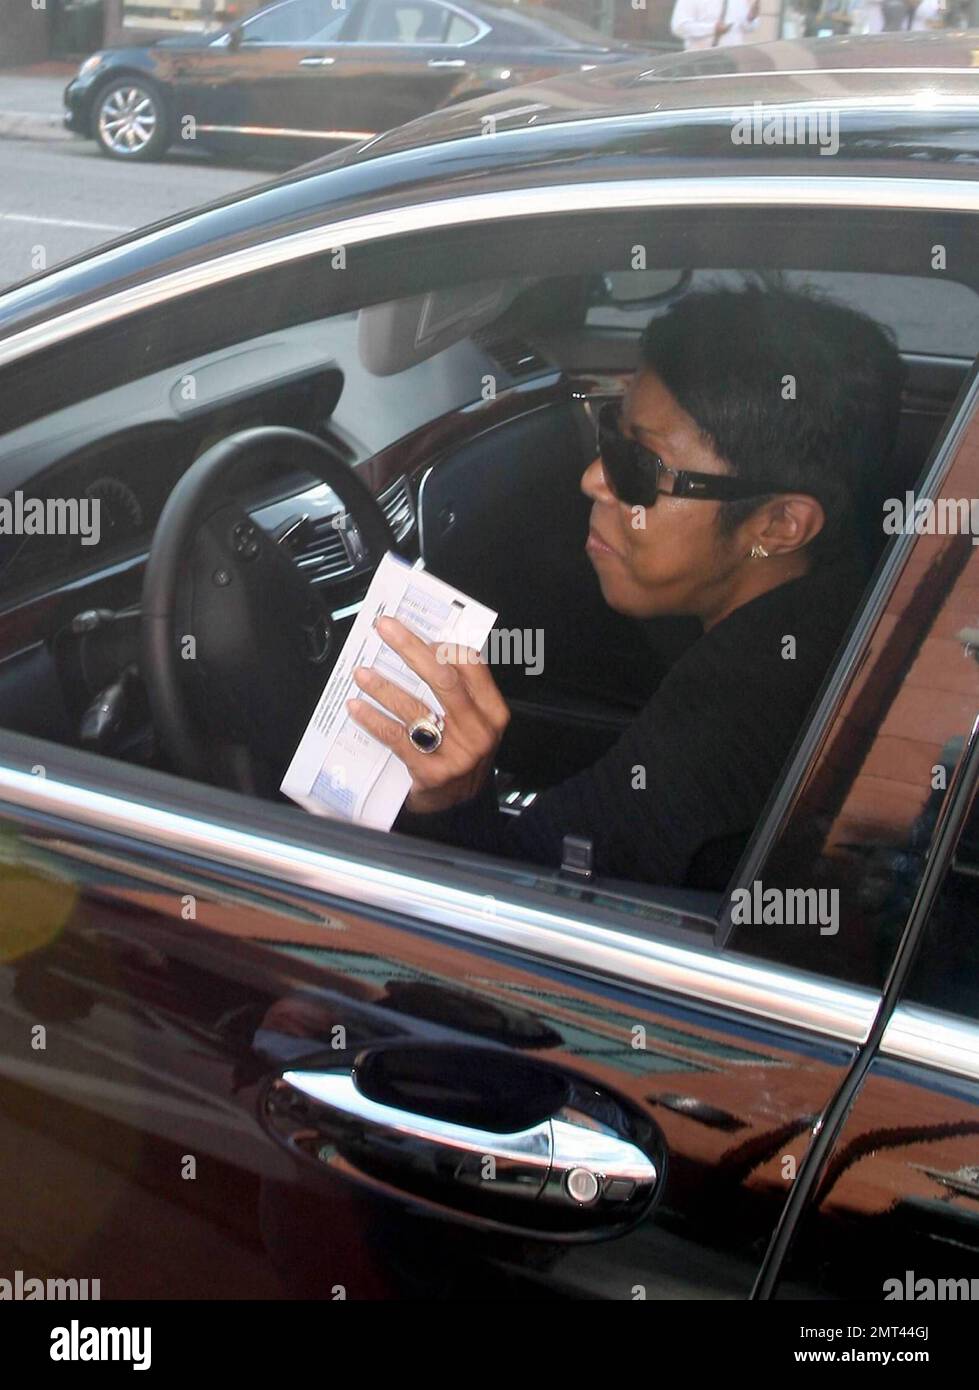 Legendary singer Natalie Cole leaves a jewelry store on Bedford Drive only  to find that she's received a parking ticket. Beverly Hills, CA. 11/12/09  Stock Photo - Alamy